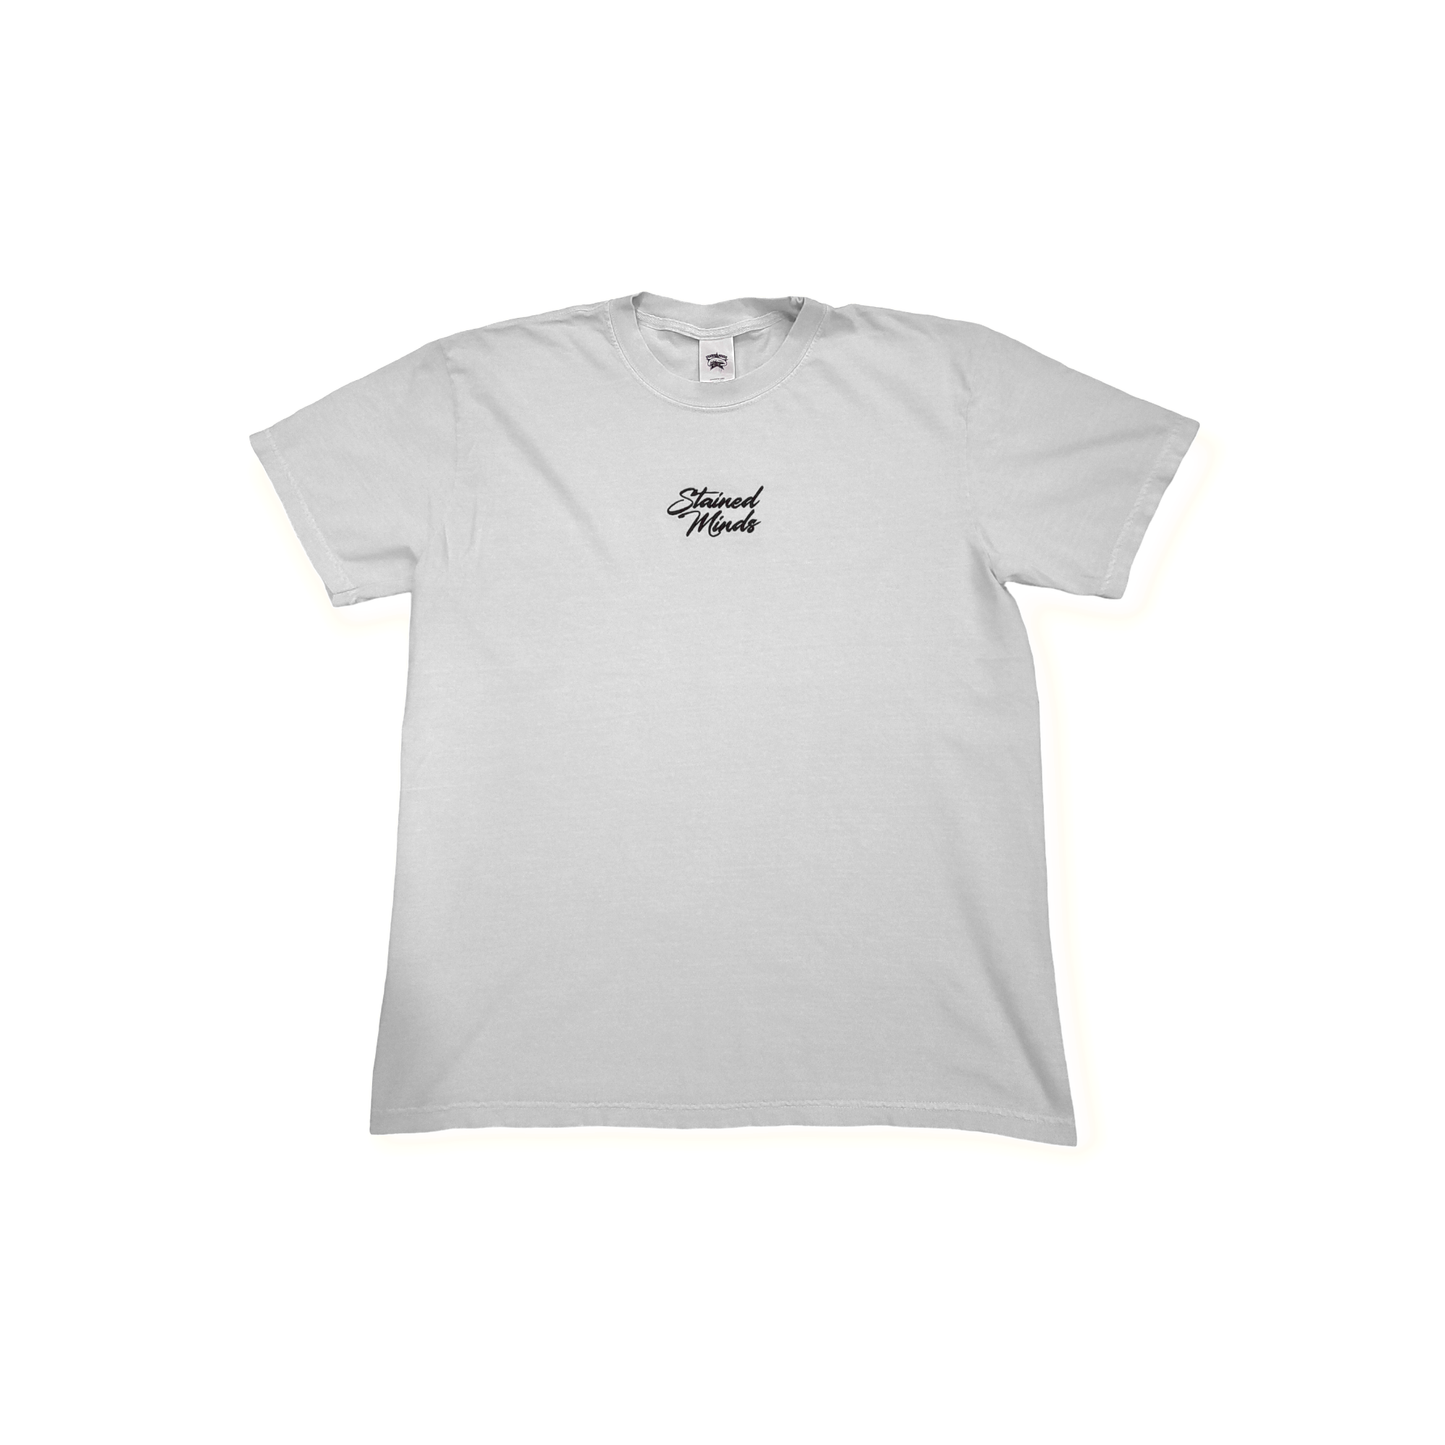 Simple Stainz - "Stained Minds" on a White Tee